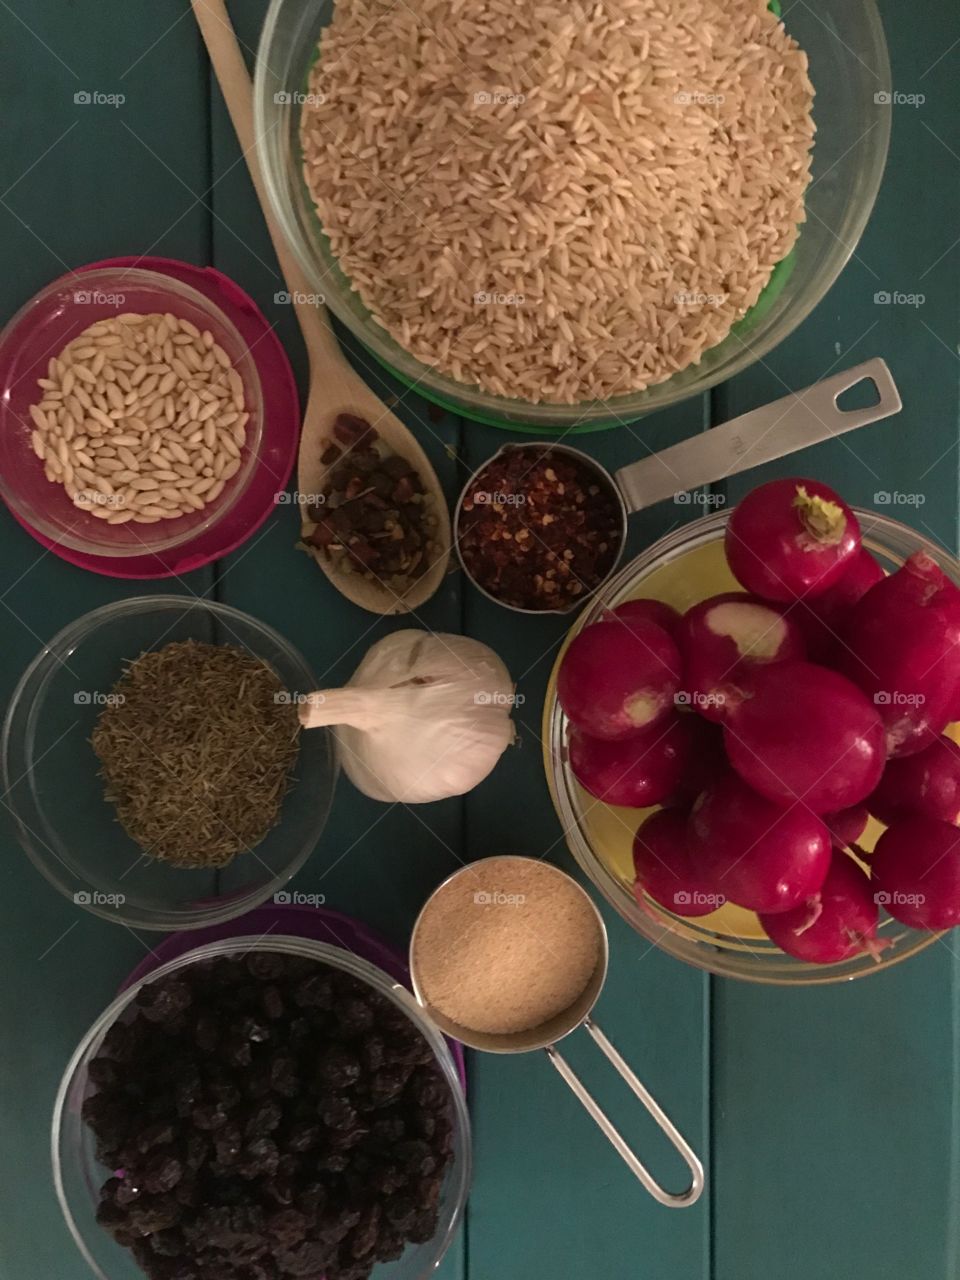 Preparing to cook with healthy ingredients such as dry brown rice, hot pepper spice, garlic powder and other fresh herbs and spices 